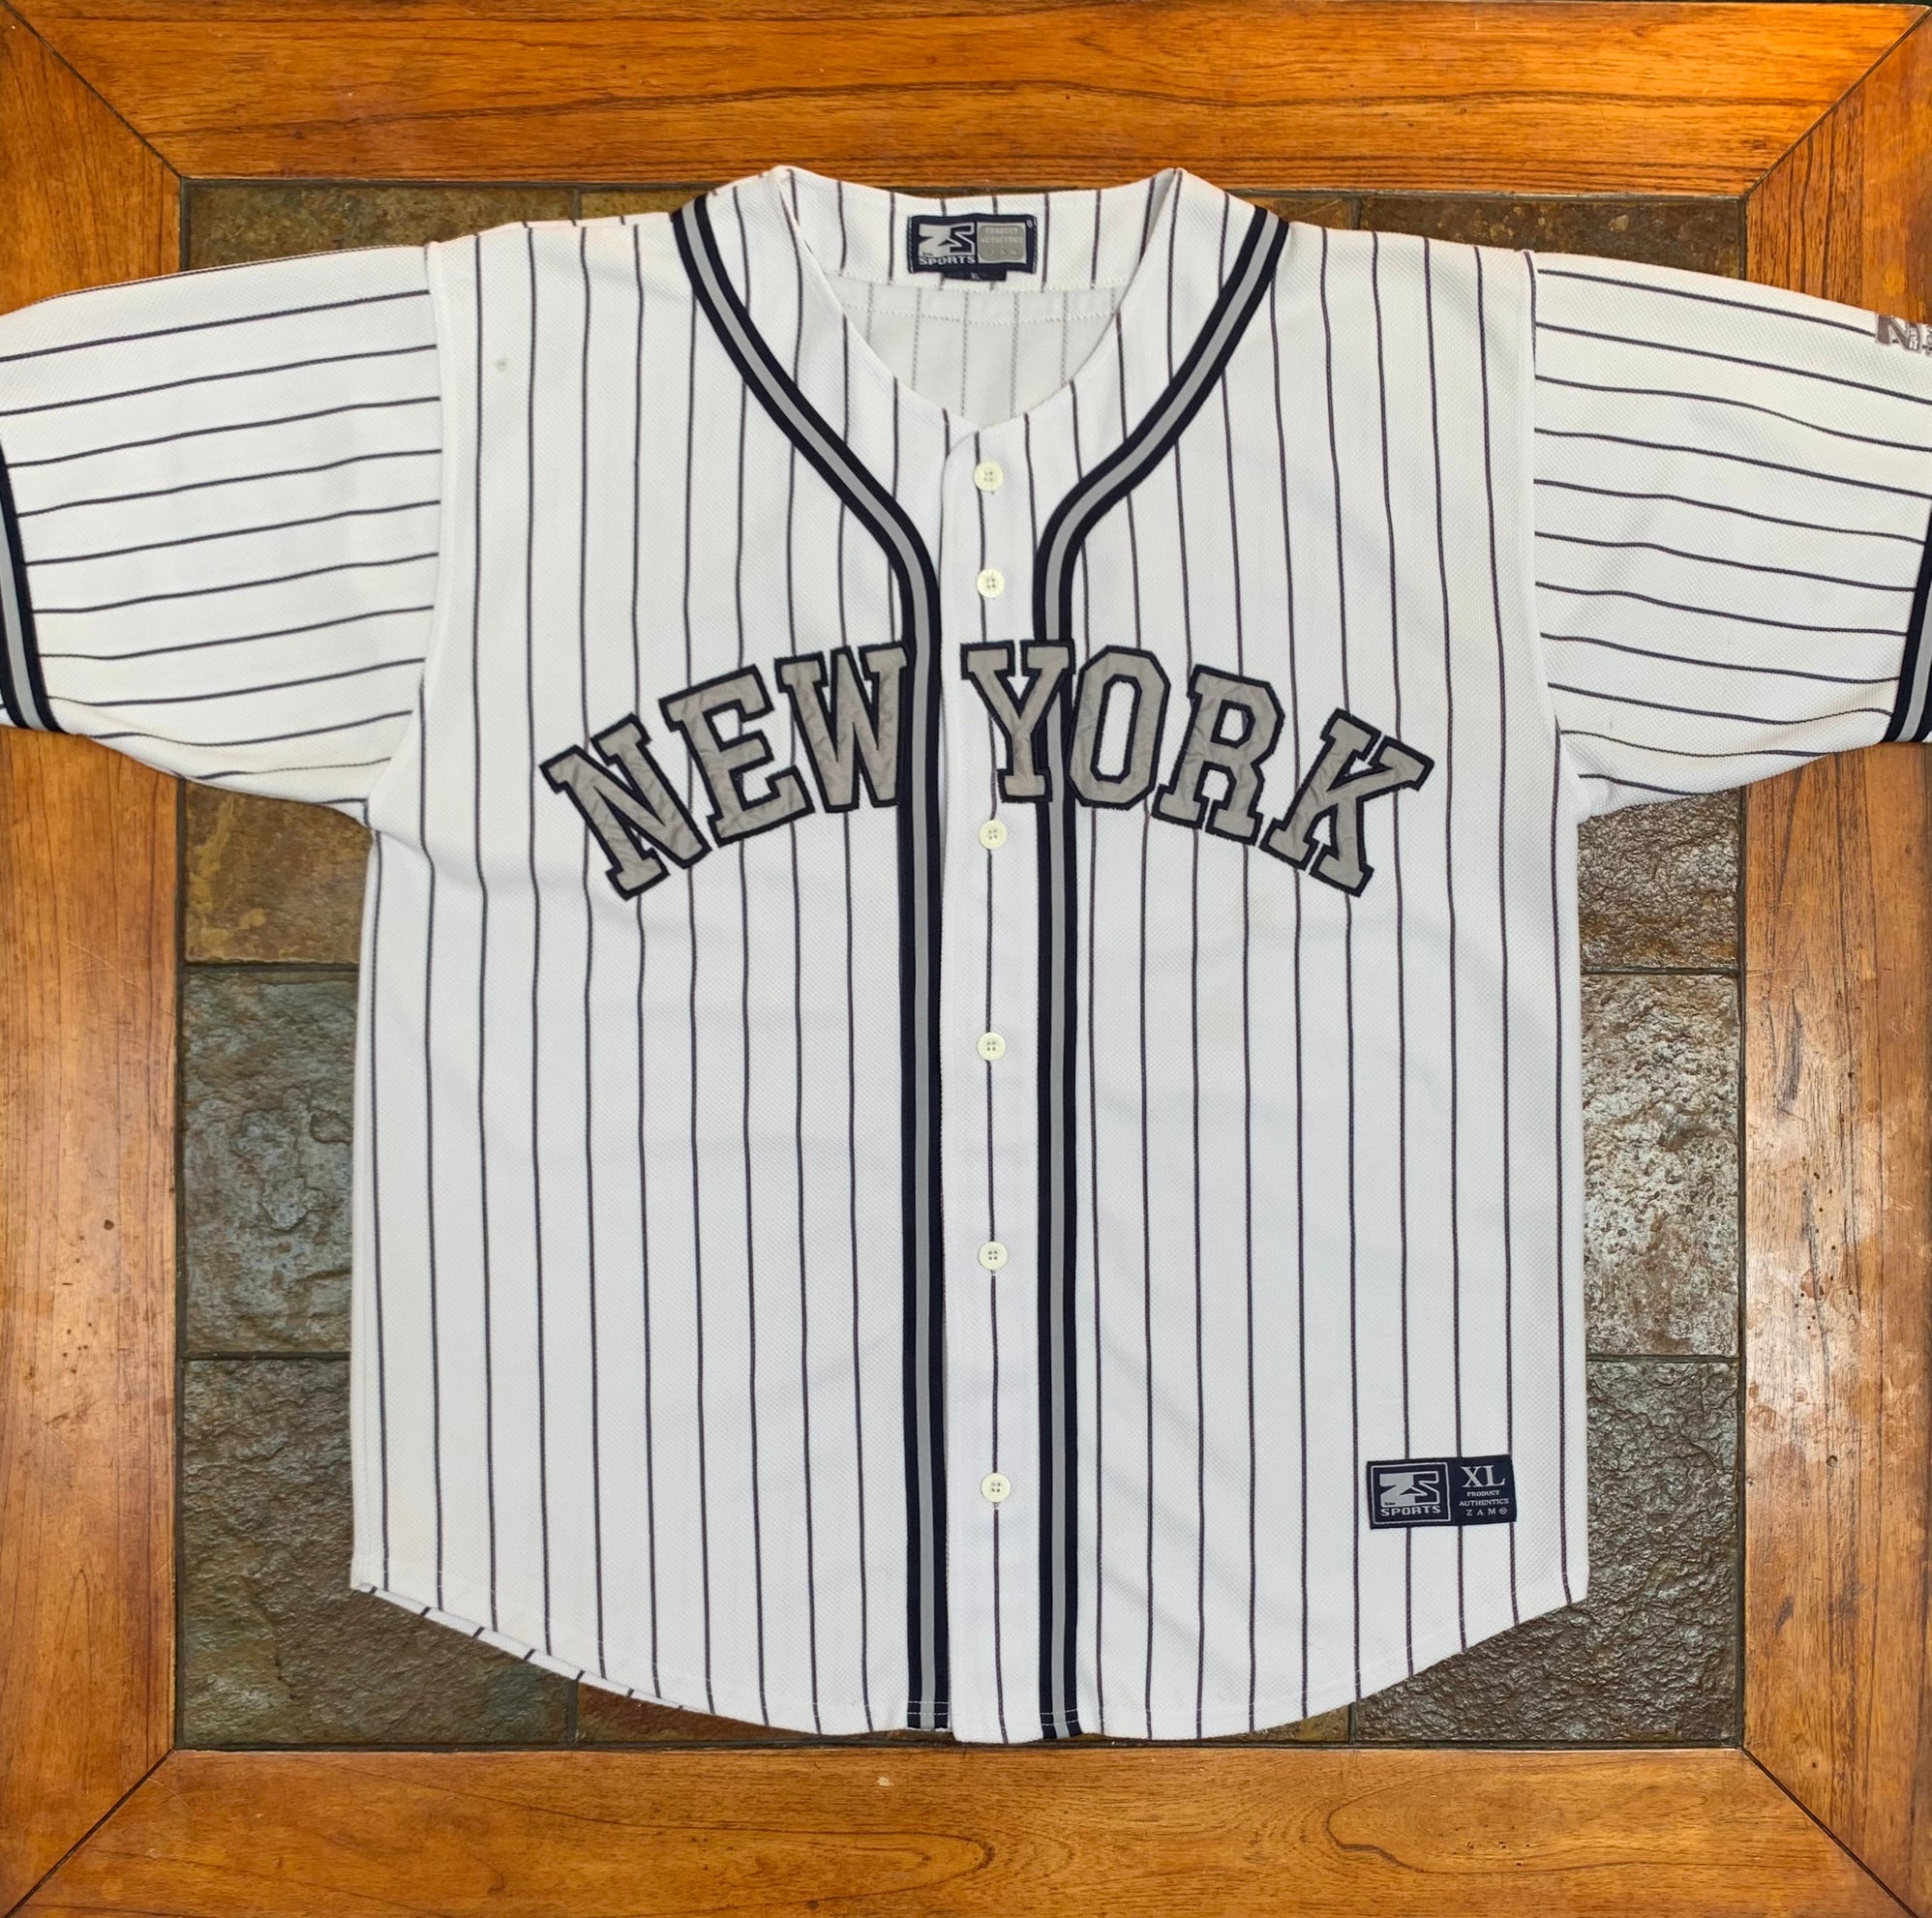 New York Yankees Mariano Rivera Authentic Black New Size 52 Majestic Jersey